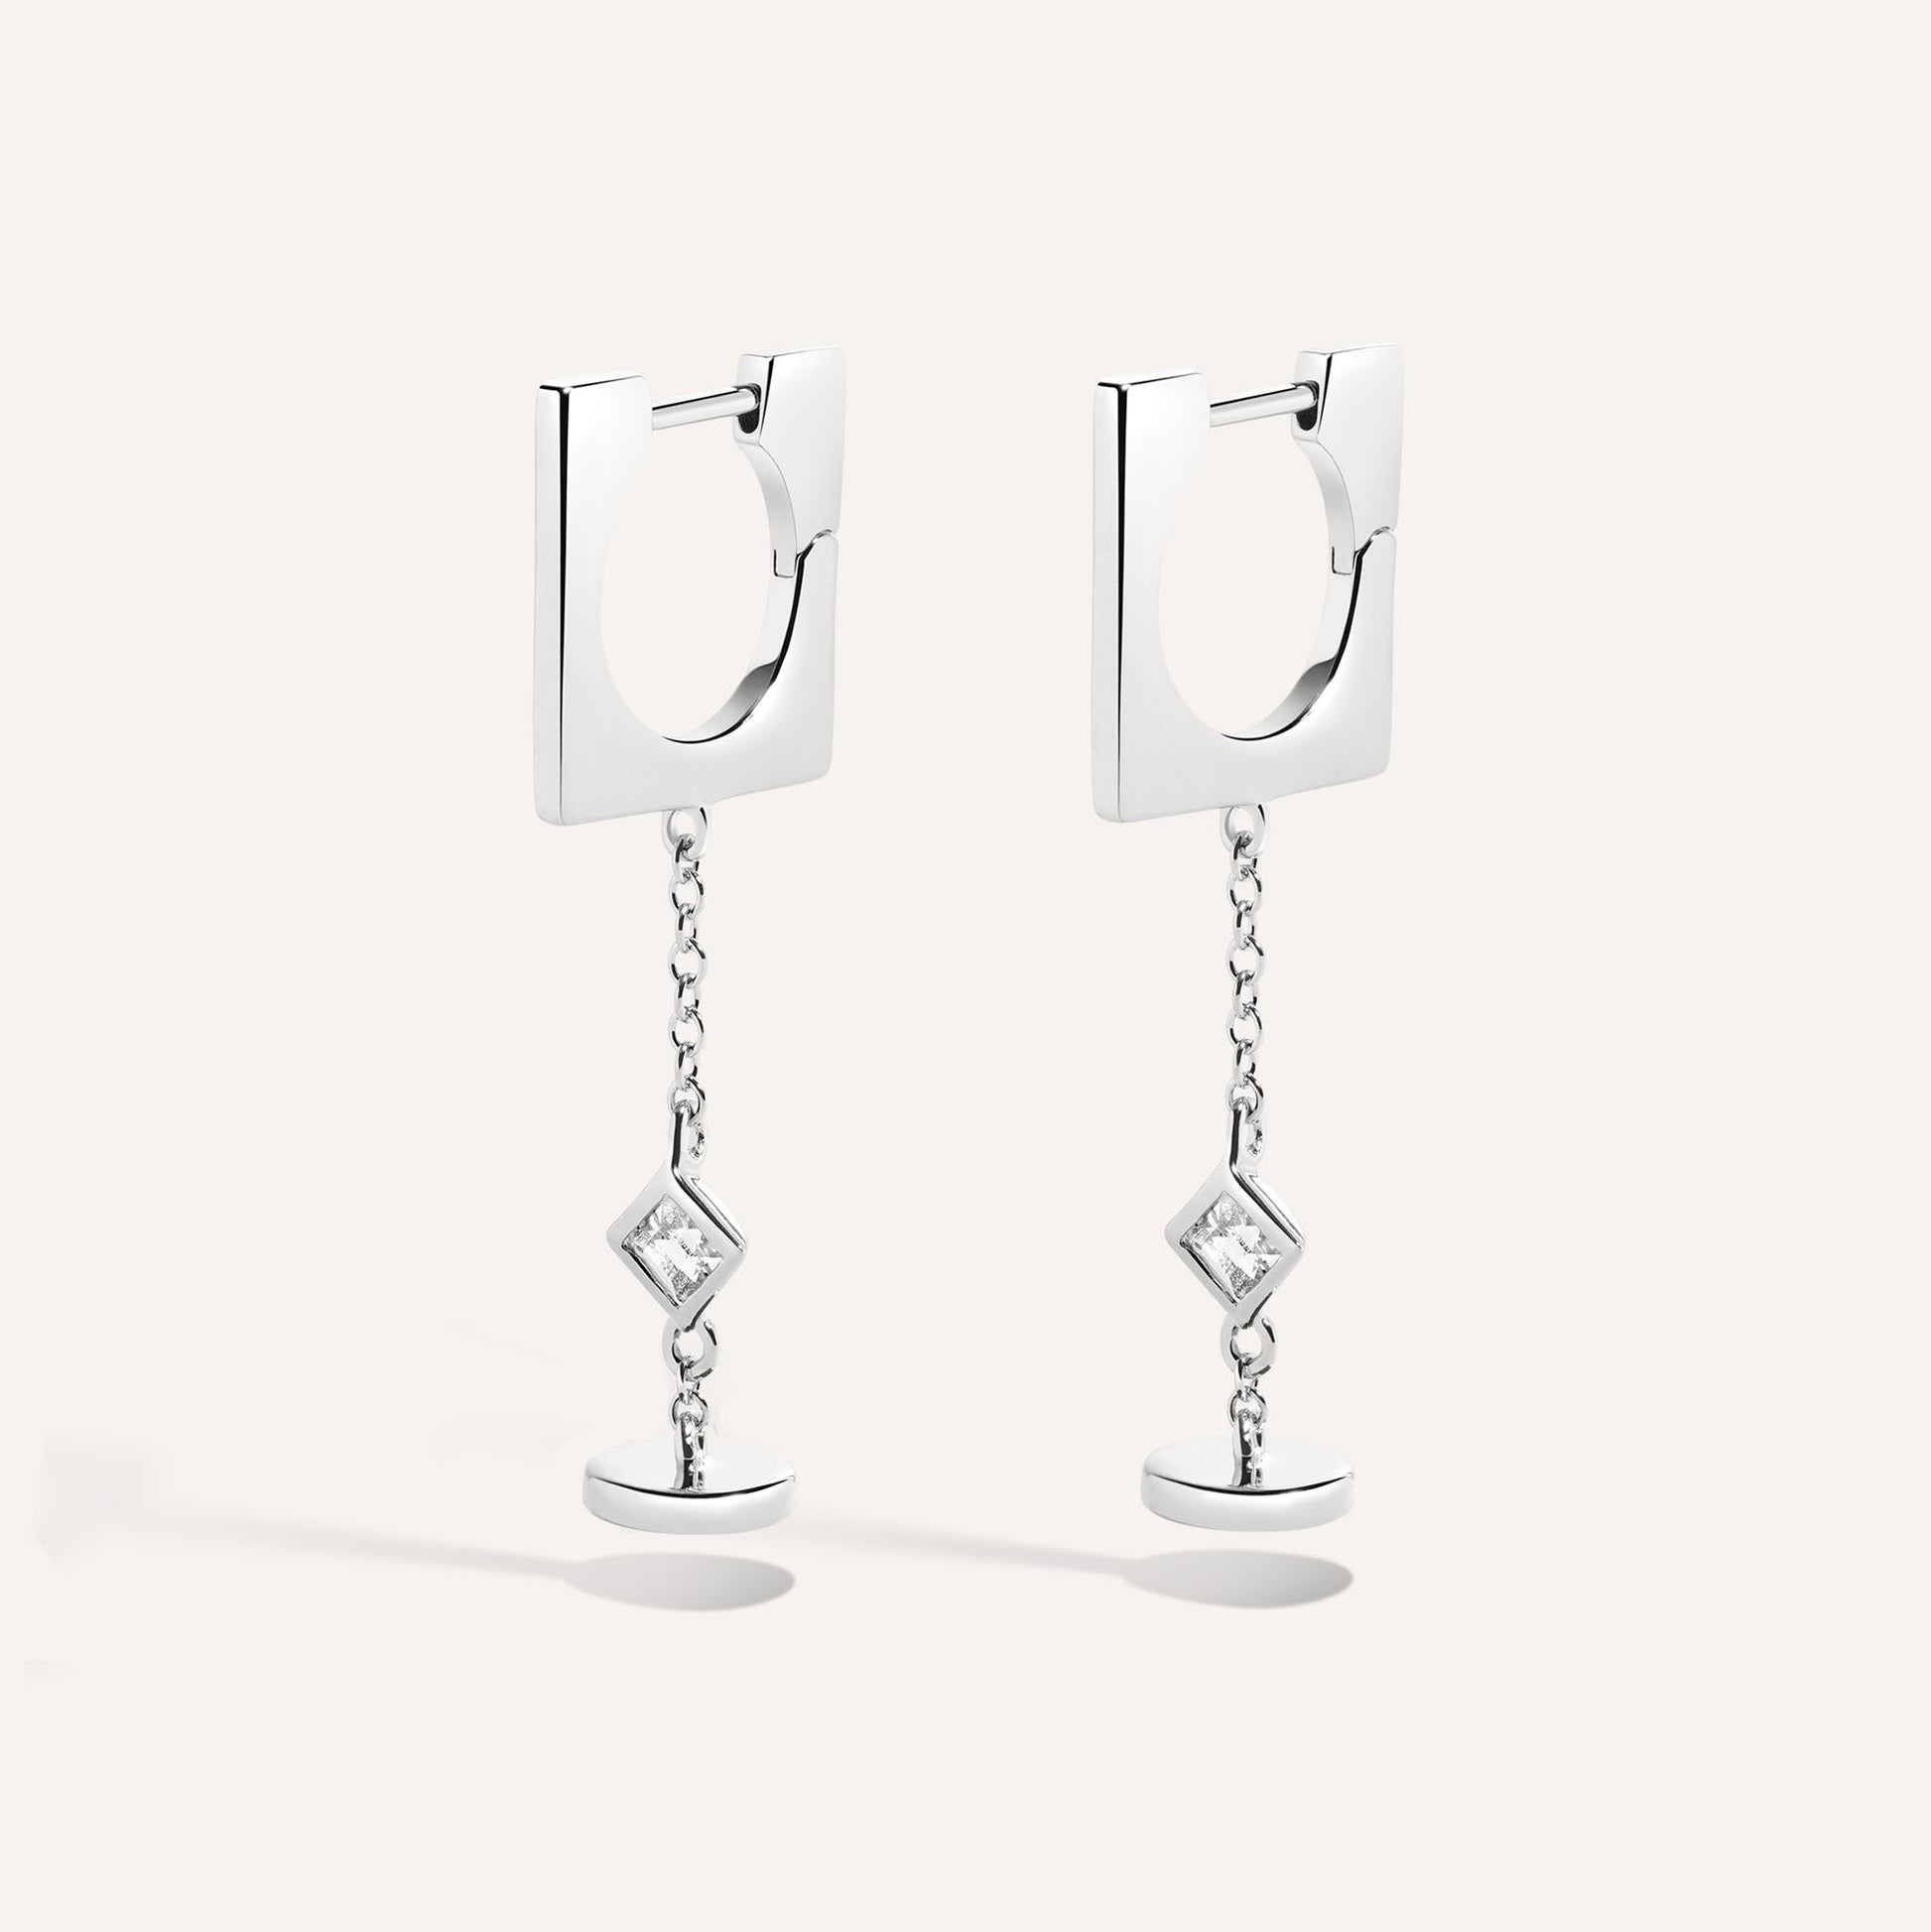 The Fortune earrings by Louis Vuitton